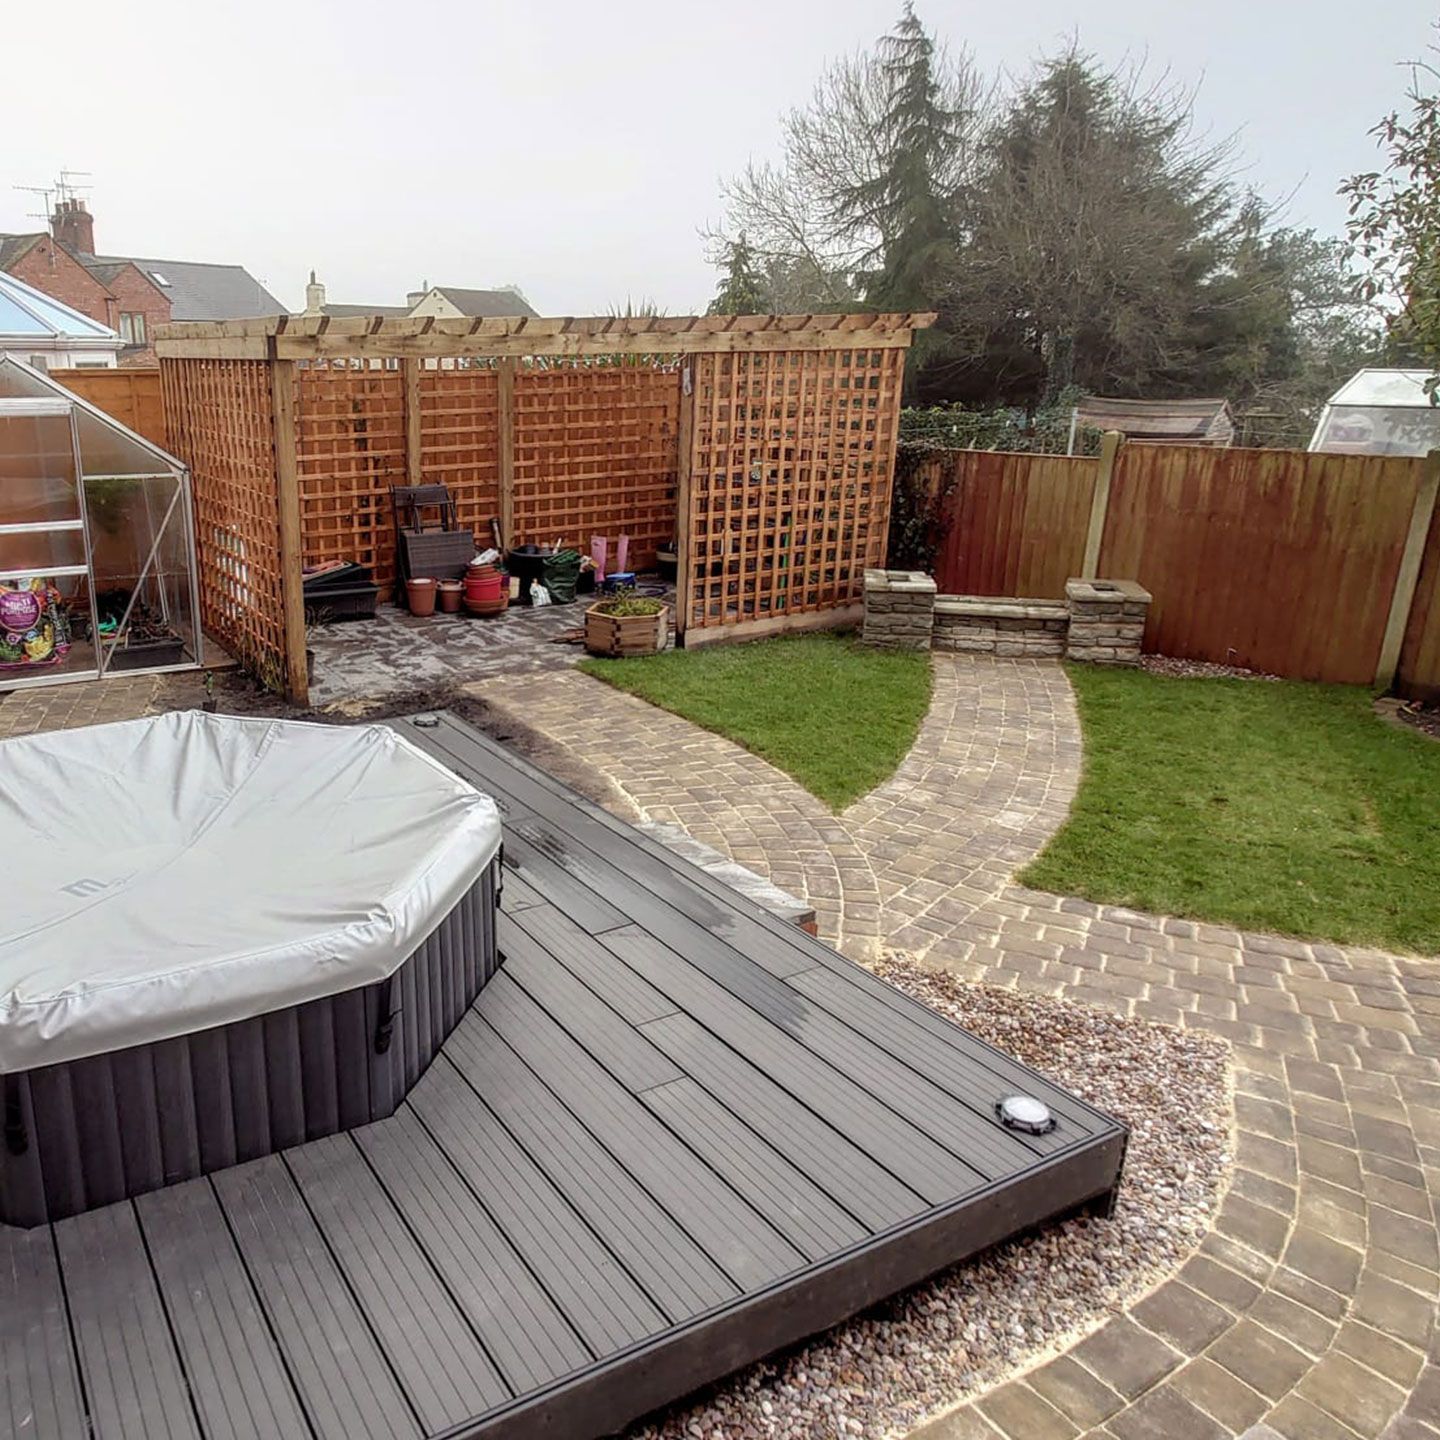 DNA Landscaping Rugby garden with composite decking in a garden